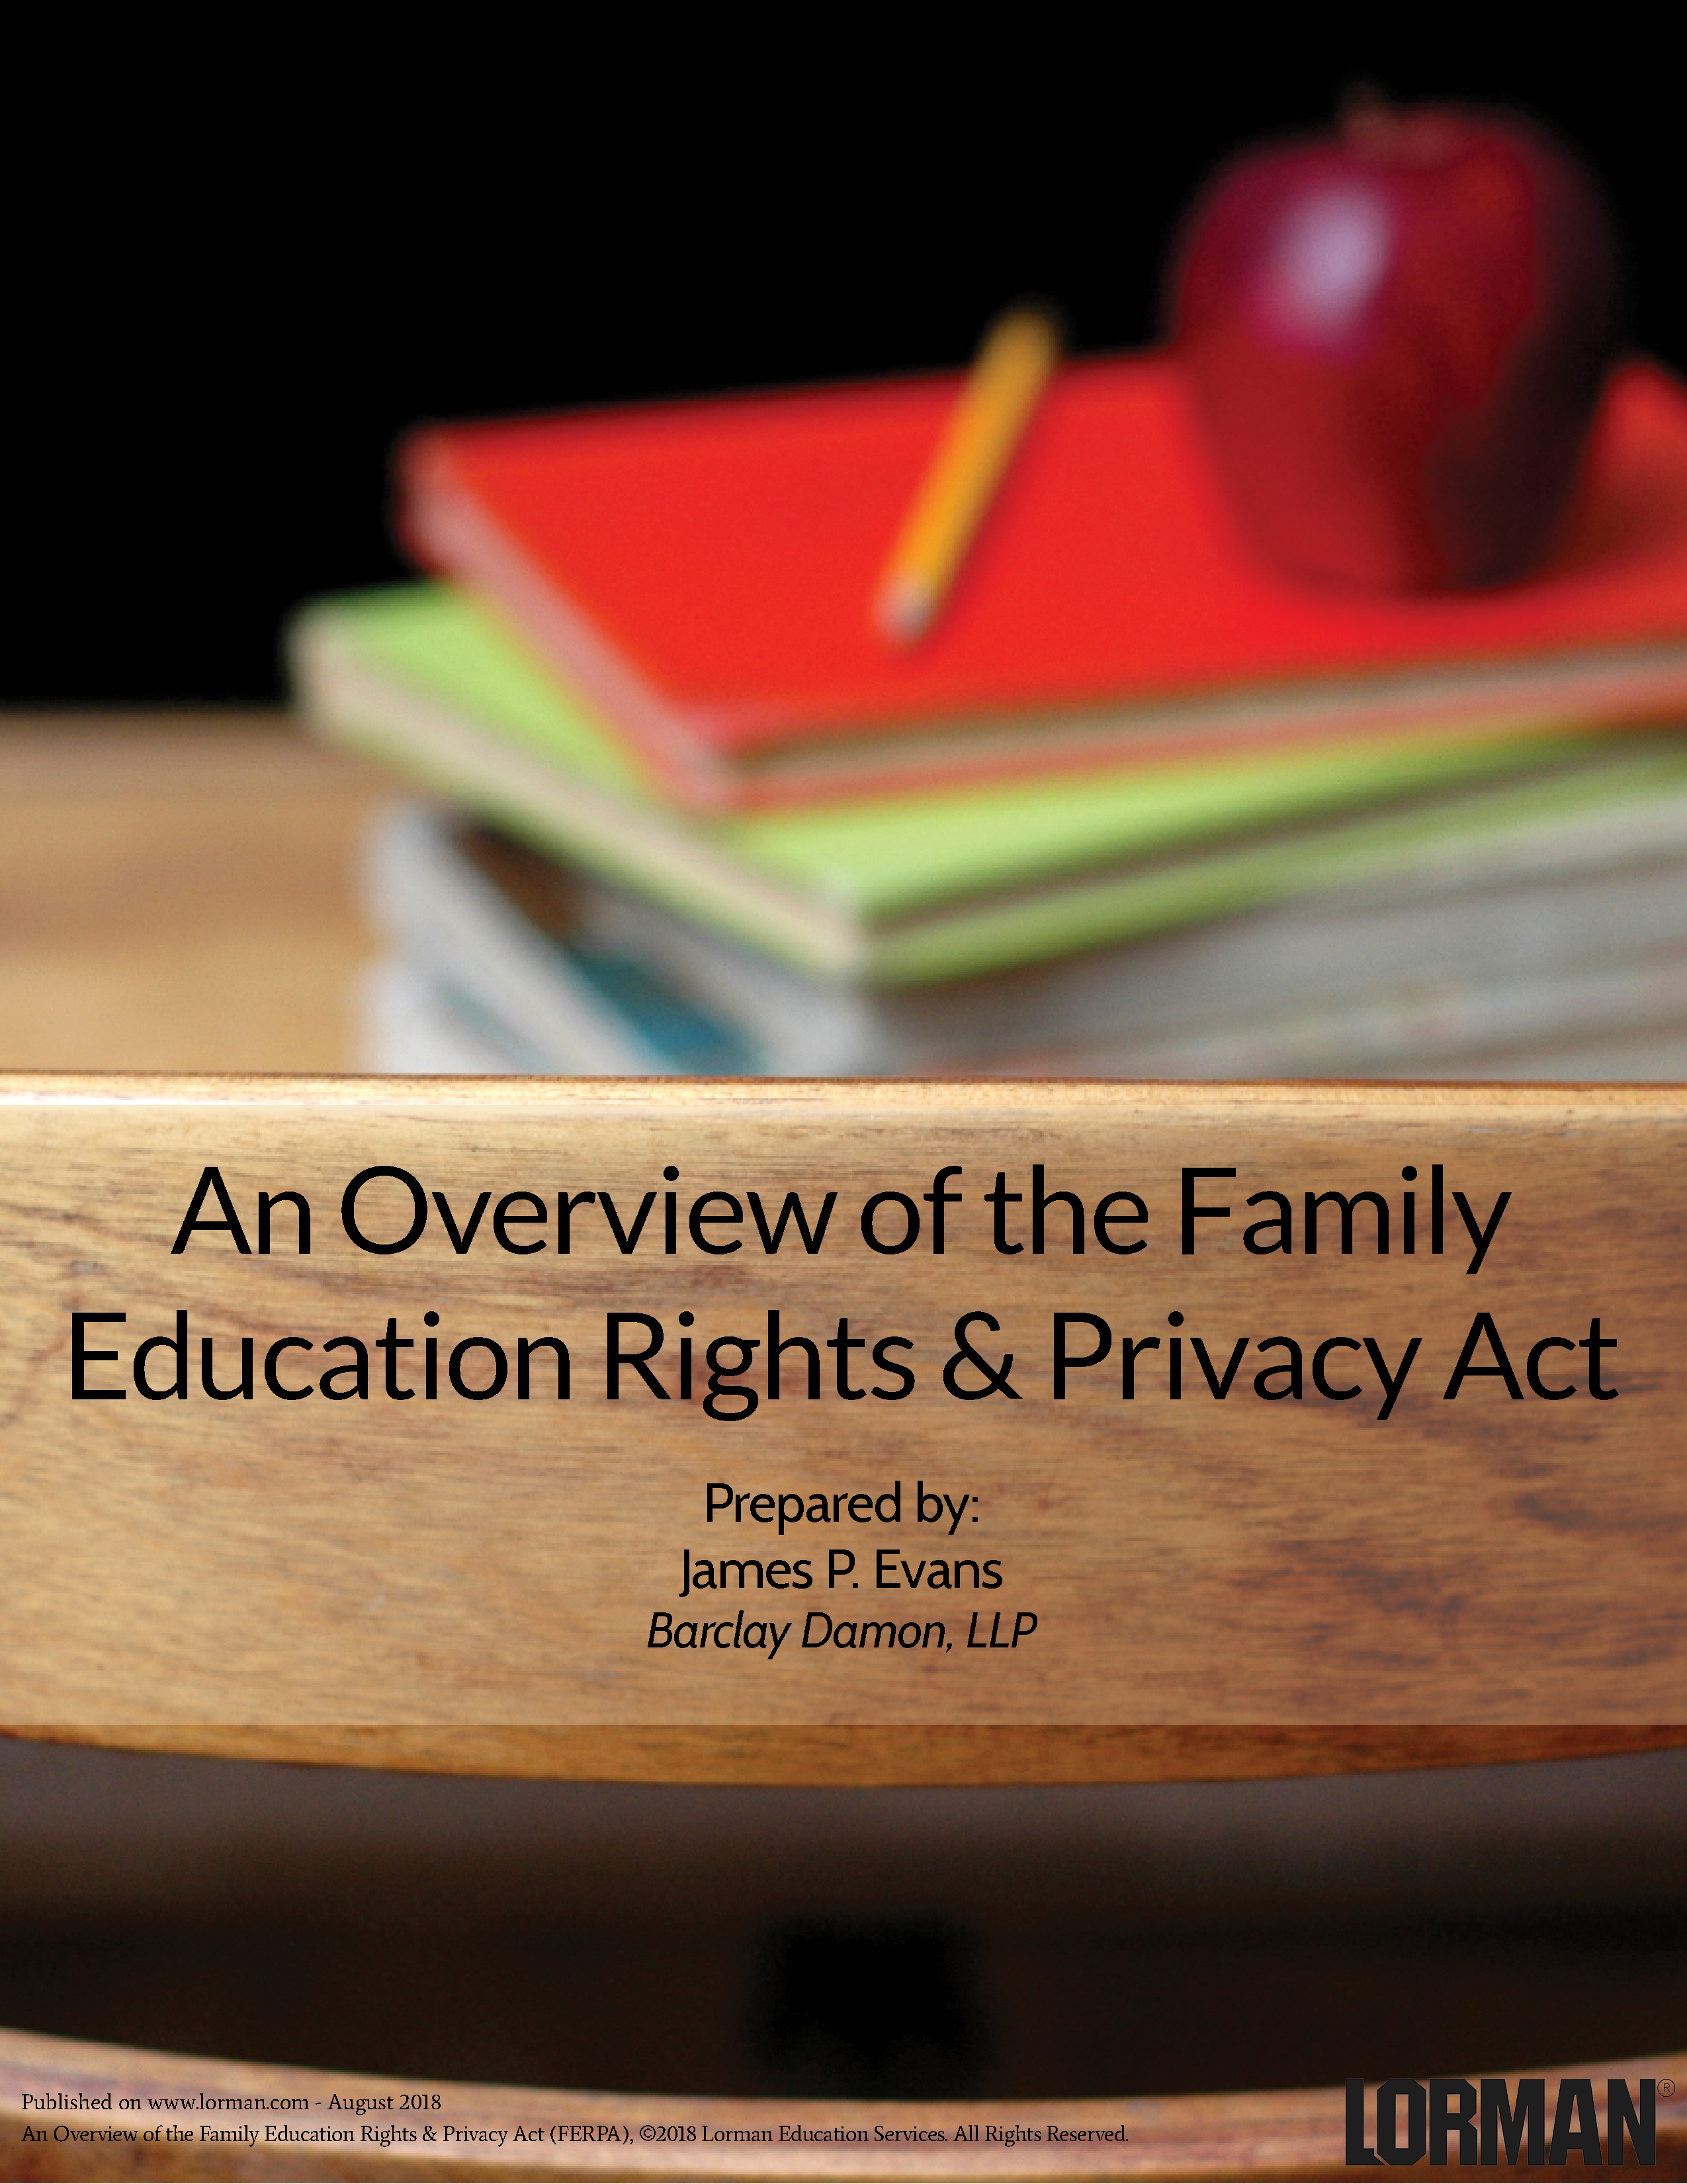 An Overview of the Family Education Rights & Privacy Act